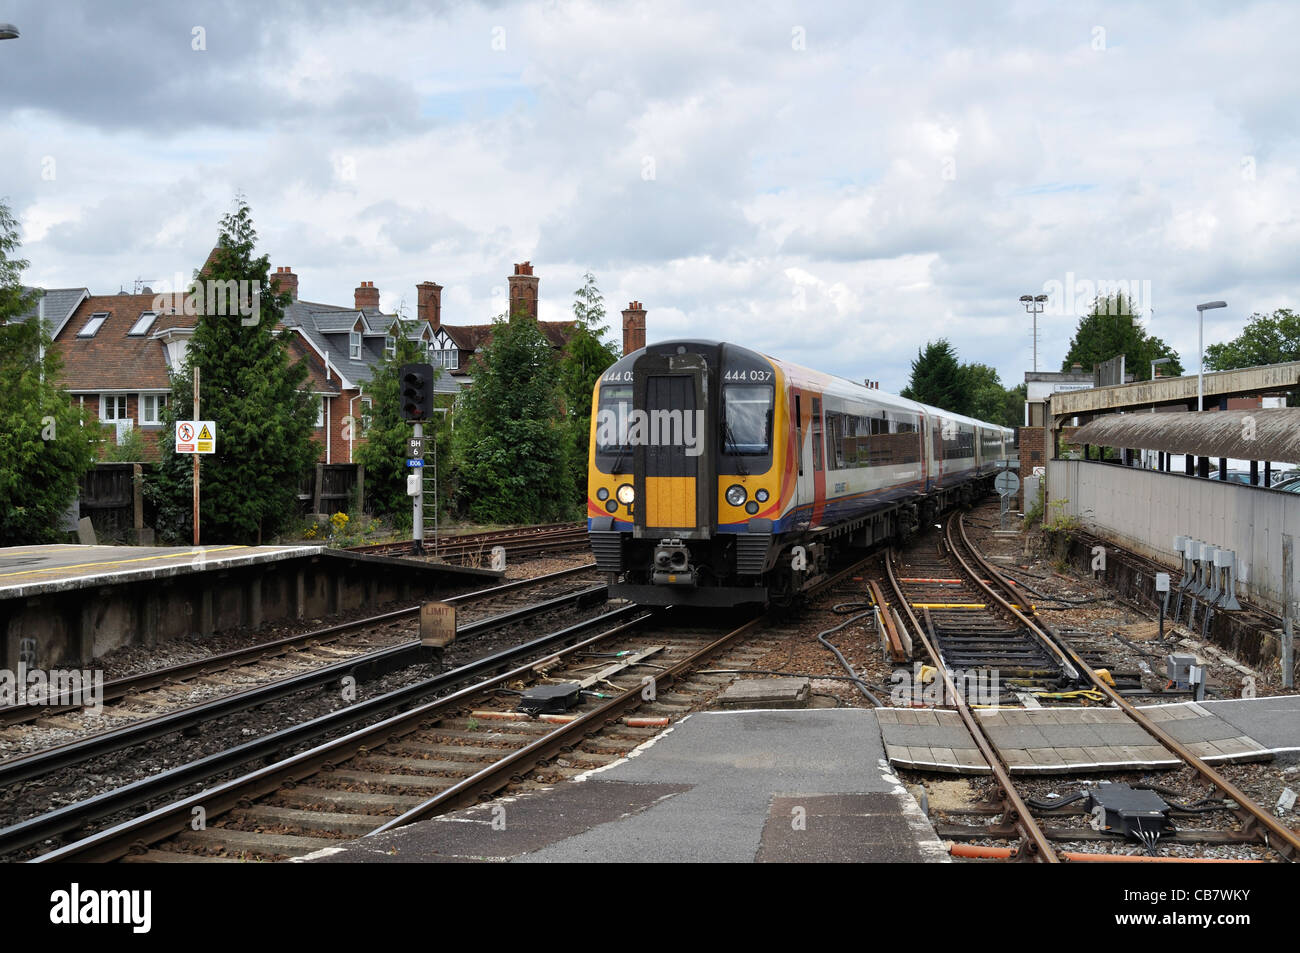 A South West Trains Class 444 electric multiple unit arrives at Brockenhurst station on a London to Weymouth service. Stock Photo